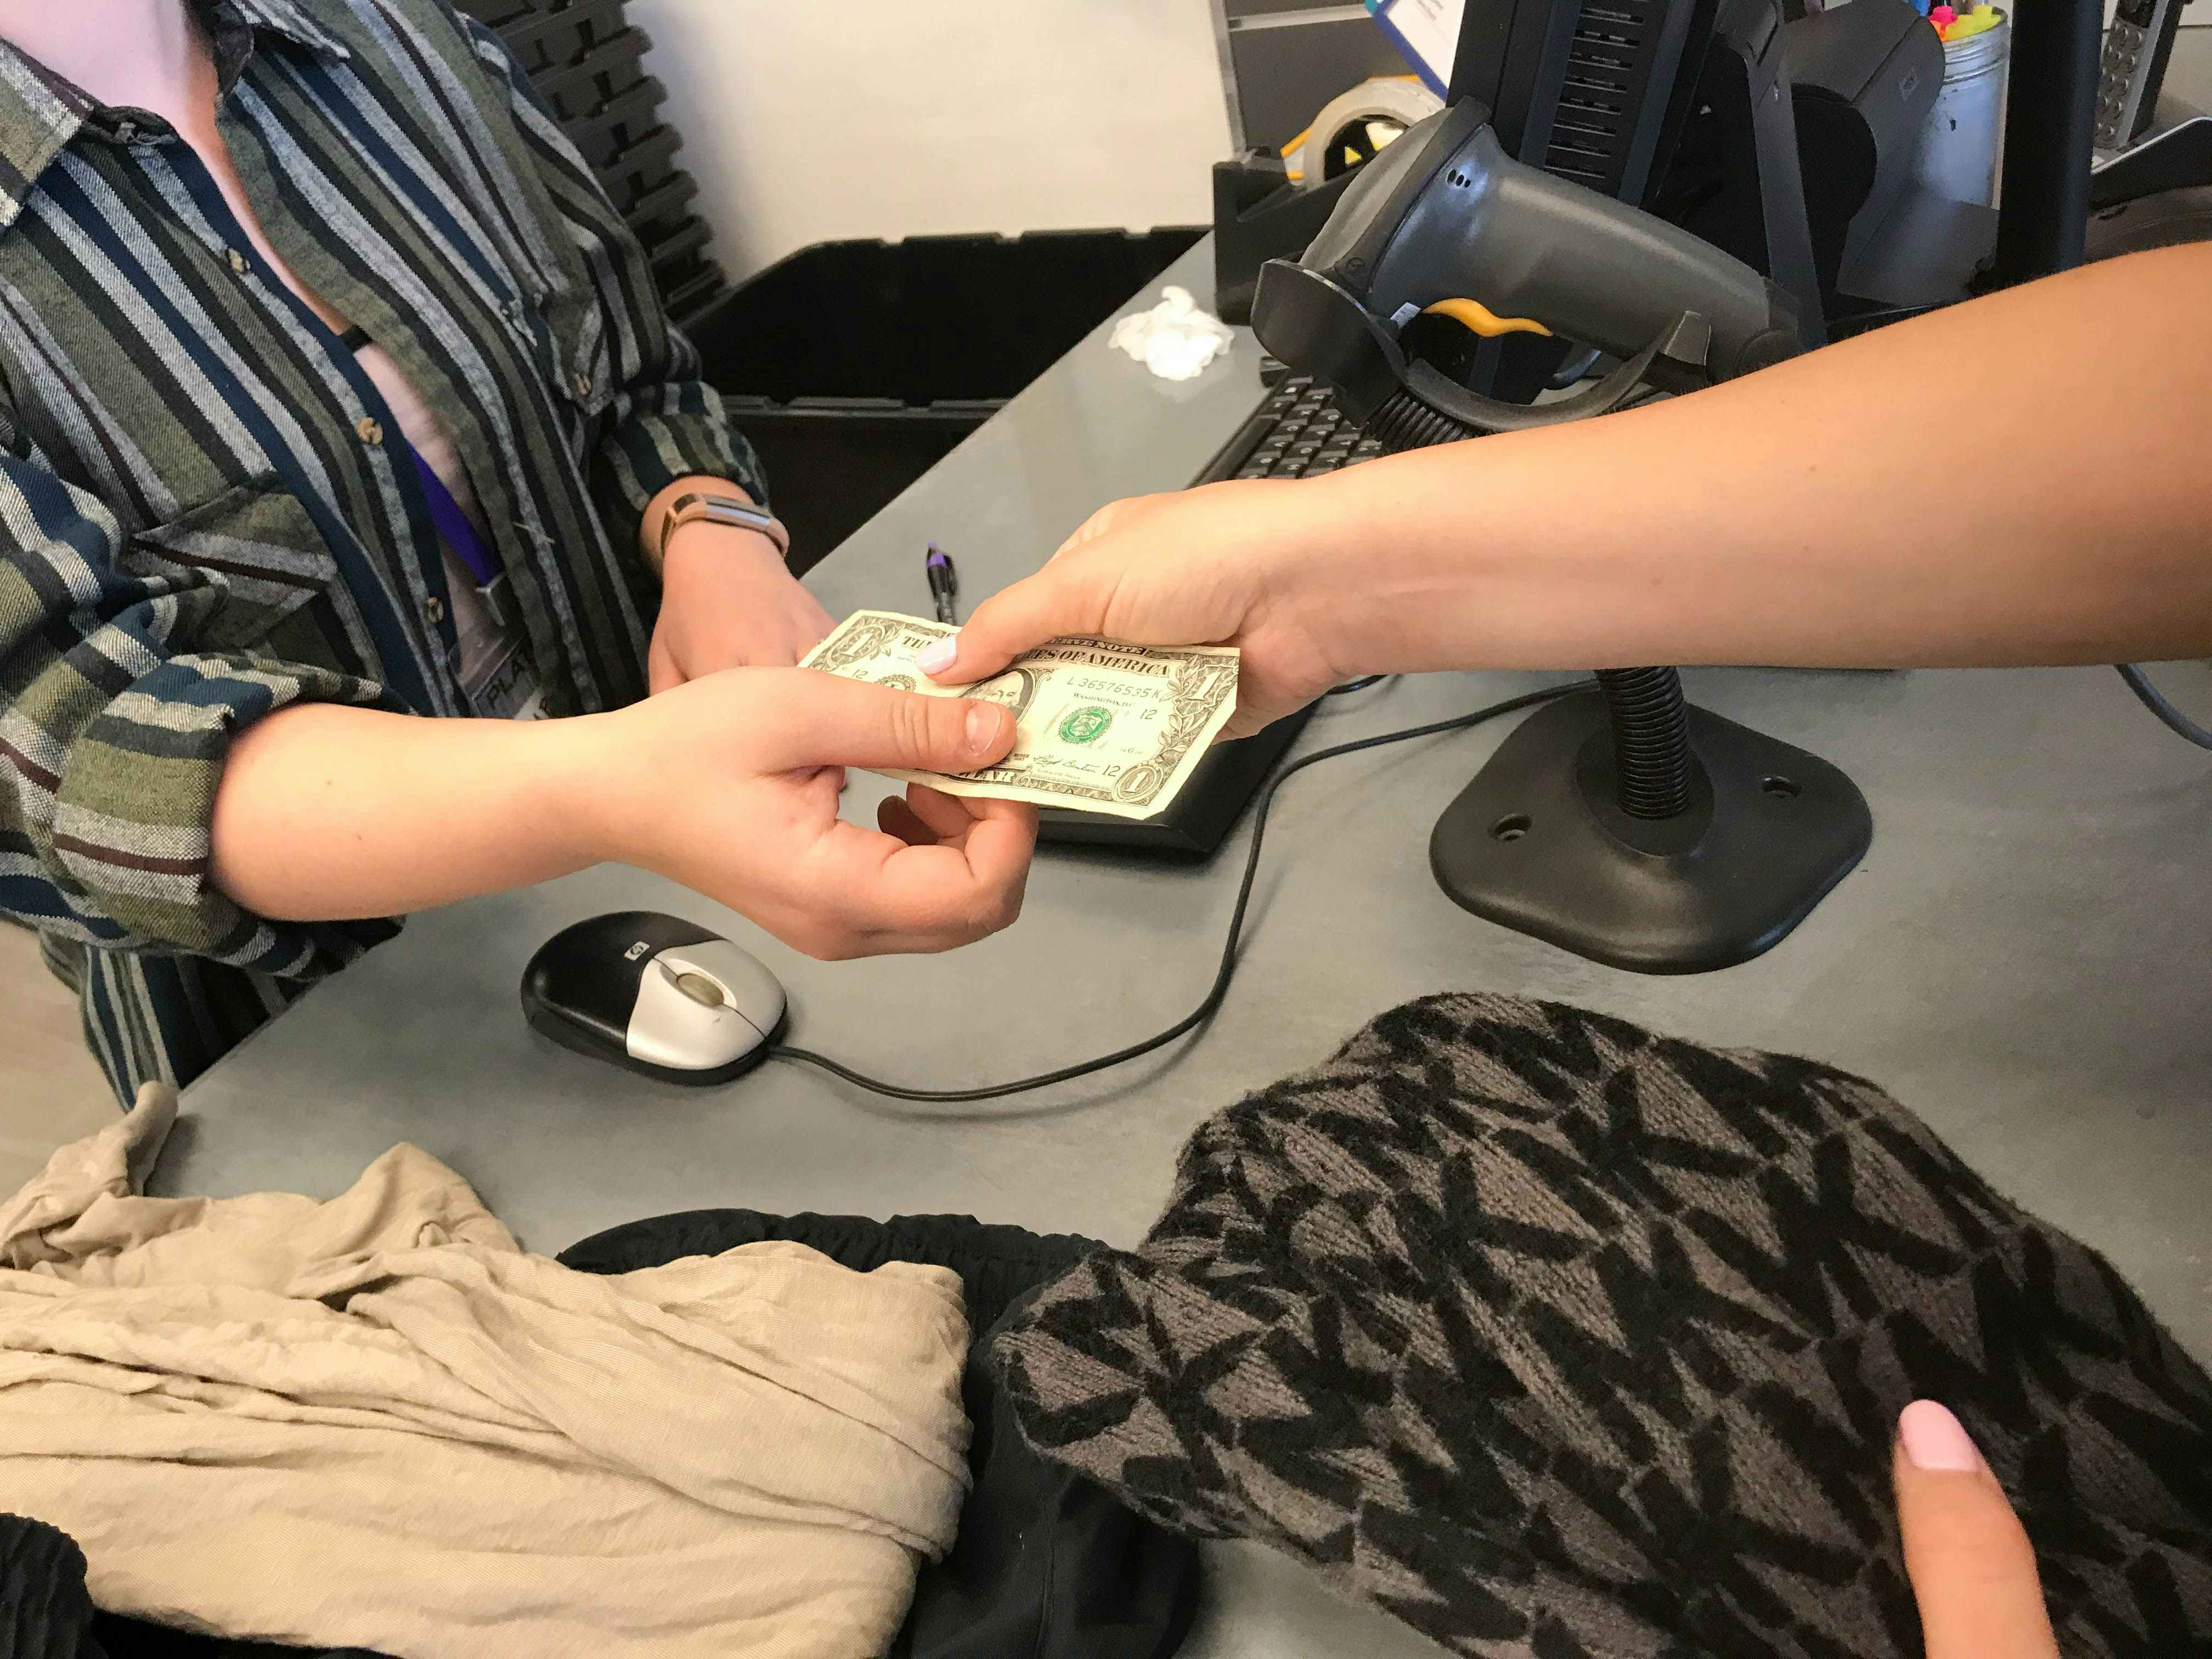 A person receiving a dollar bill from a store employee at a register.